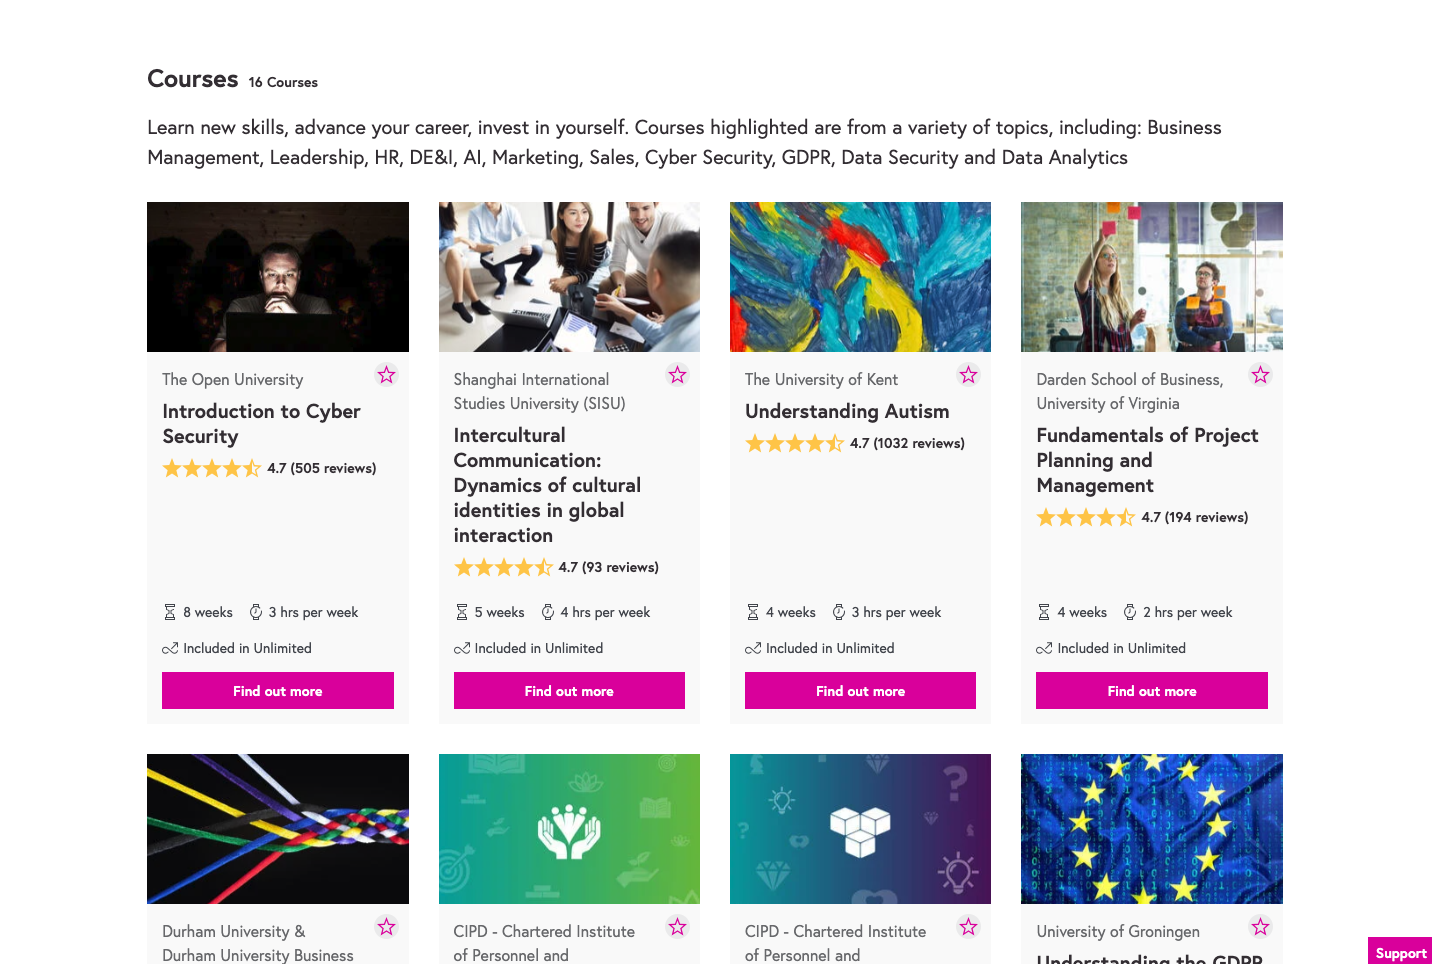 Grid of top performing courses